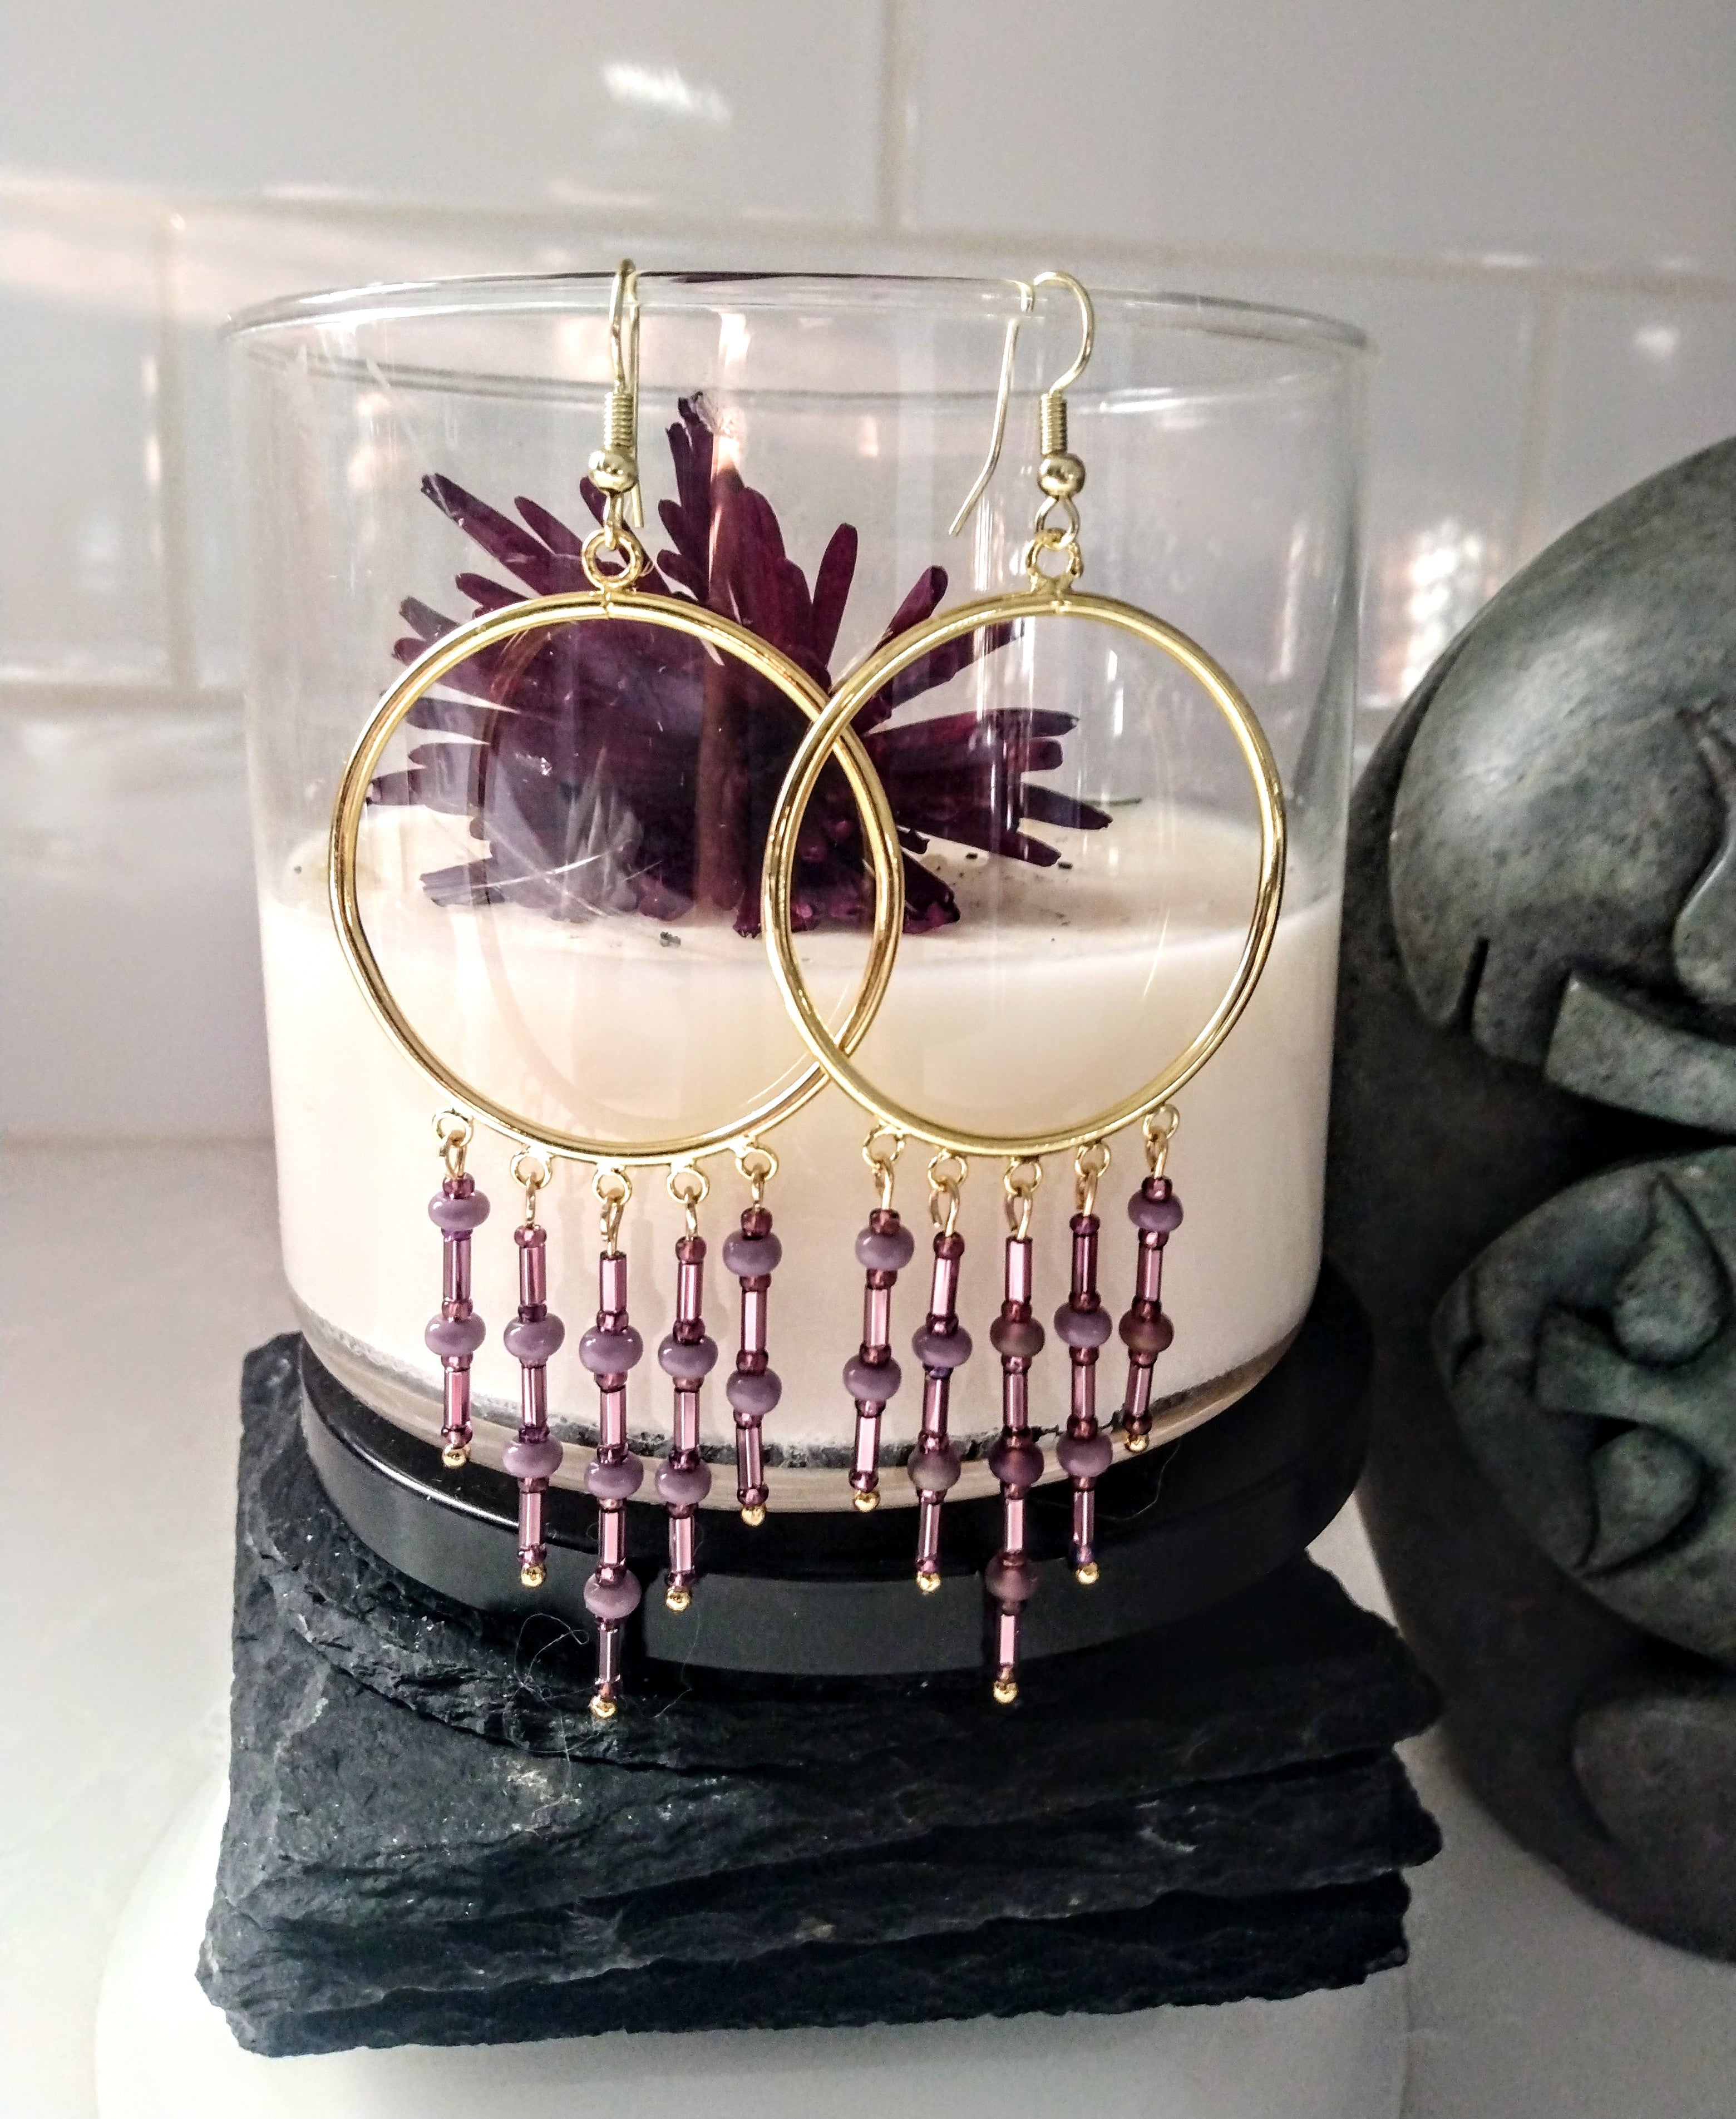 Good Color Hoop Earrings with Mixed Purple Tone Beads